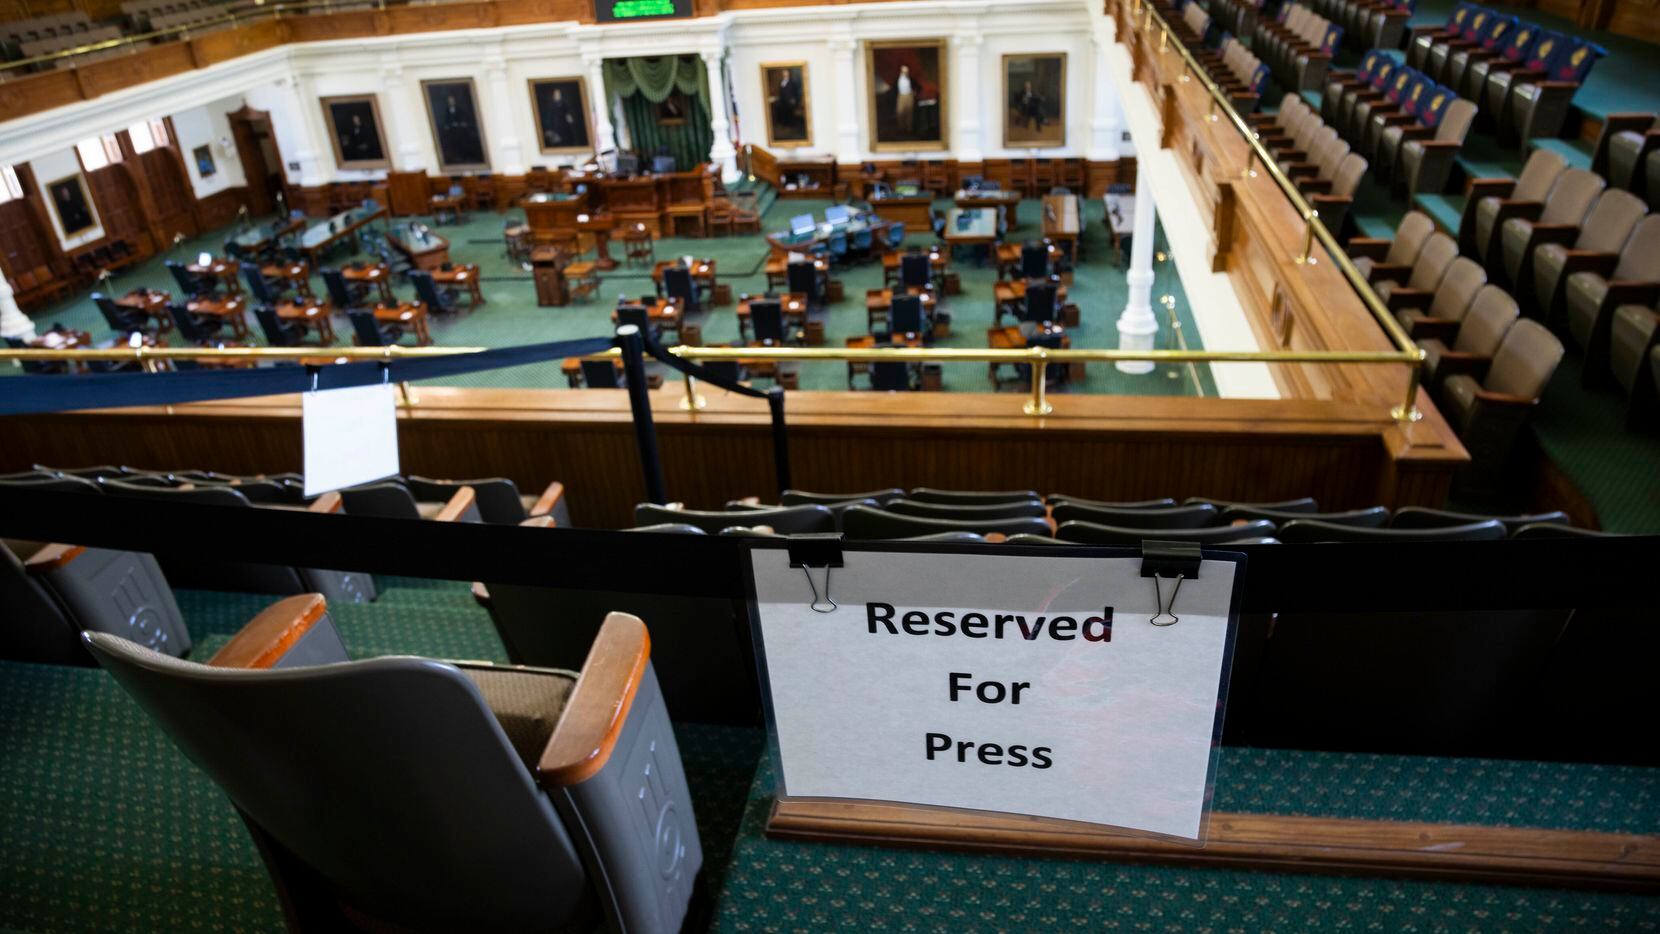 A section reserved for press in the gallery of the Texas Senate at the Texas state Capitol...